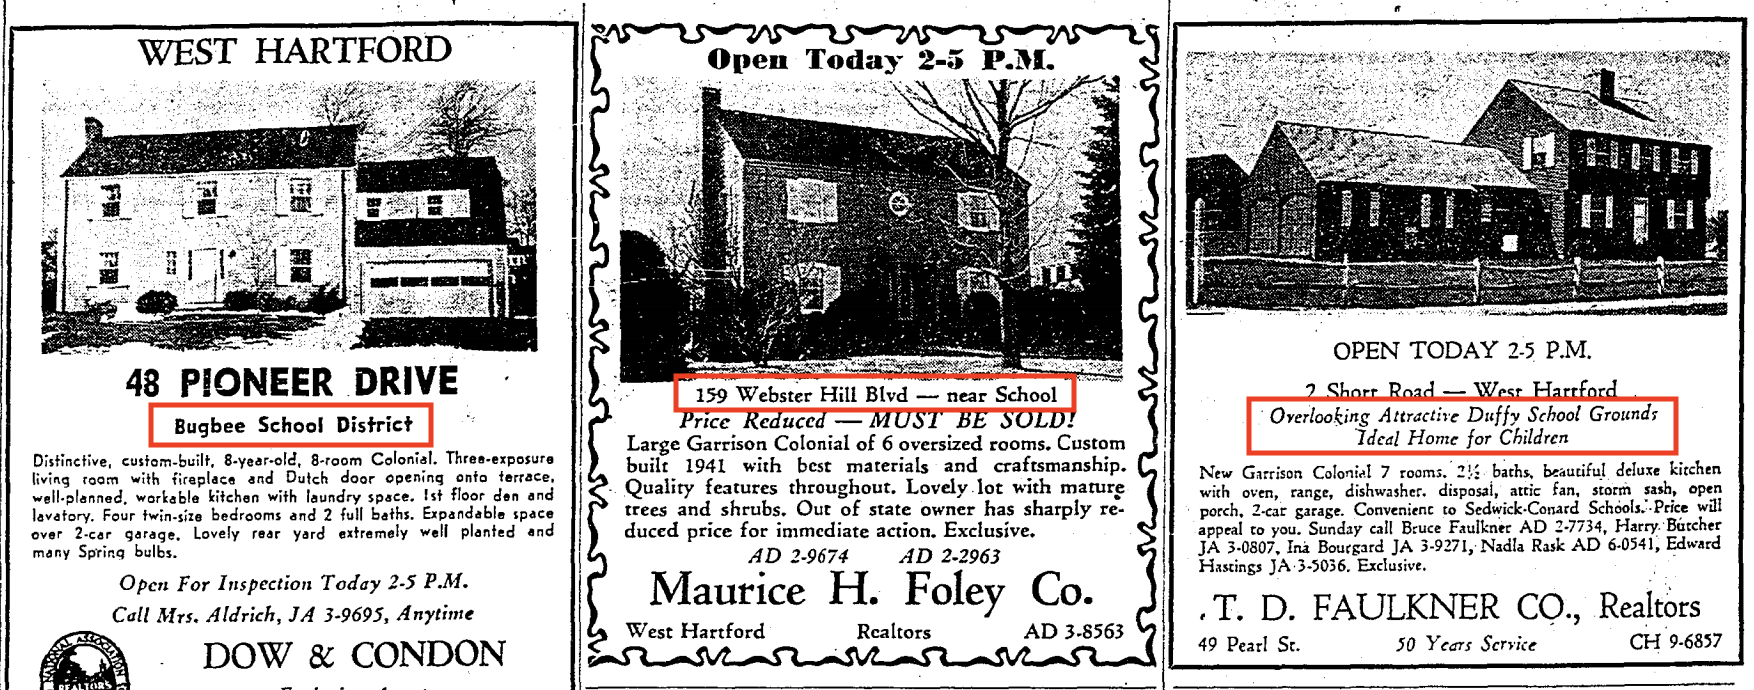 Three West Hartford private real estate ads in 1960, with public schools highlighted in red. Copyrighted by the Hartford Courant, reprinted here under Fair Use guidelines.